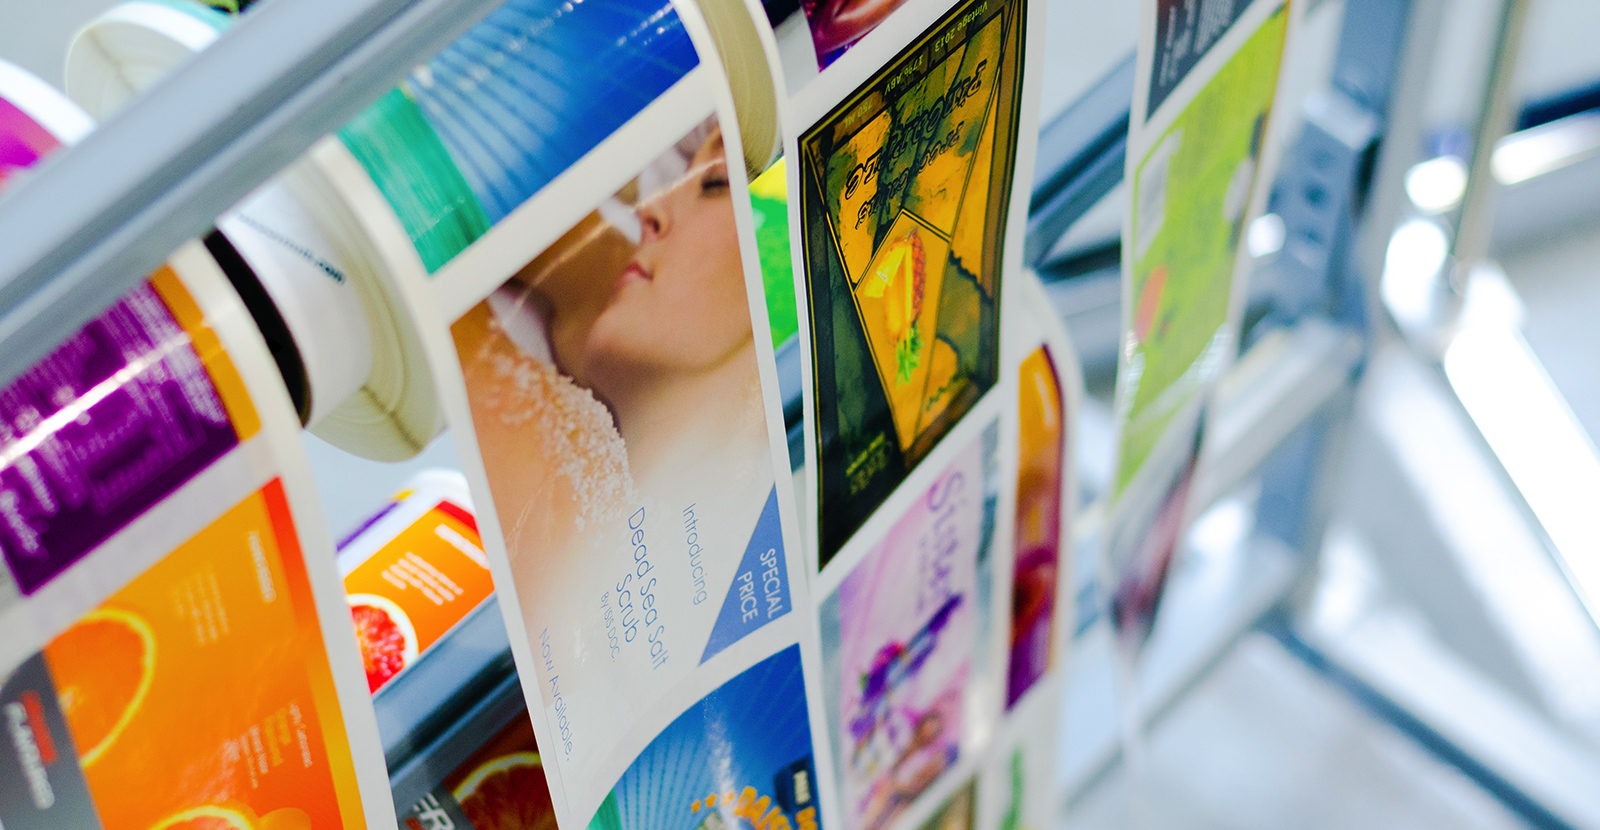 Label & Packaging. Make the SCREEN inkjet decision and widen your printing applications.